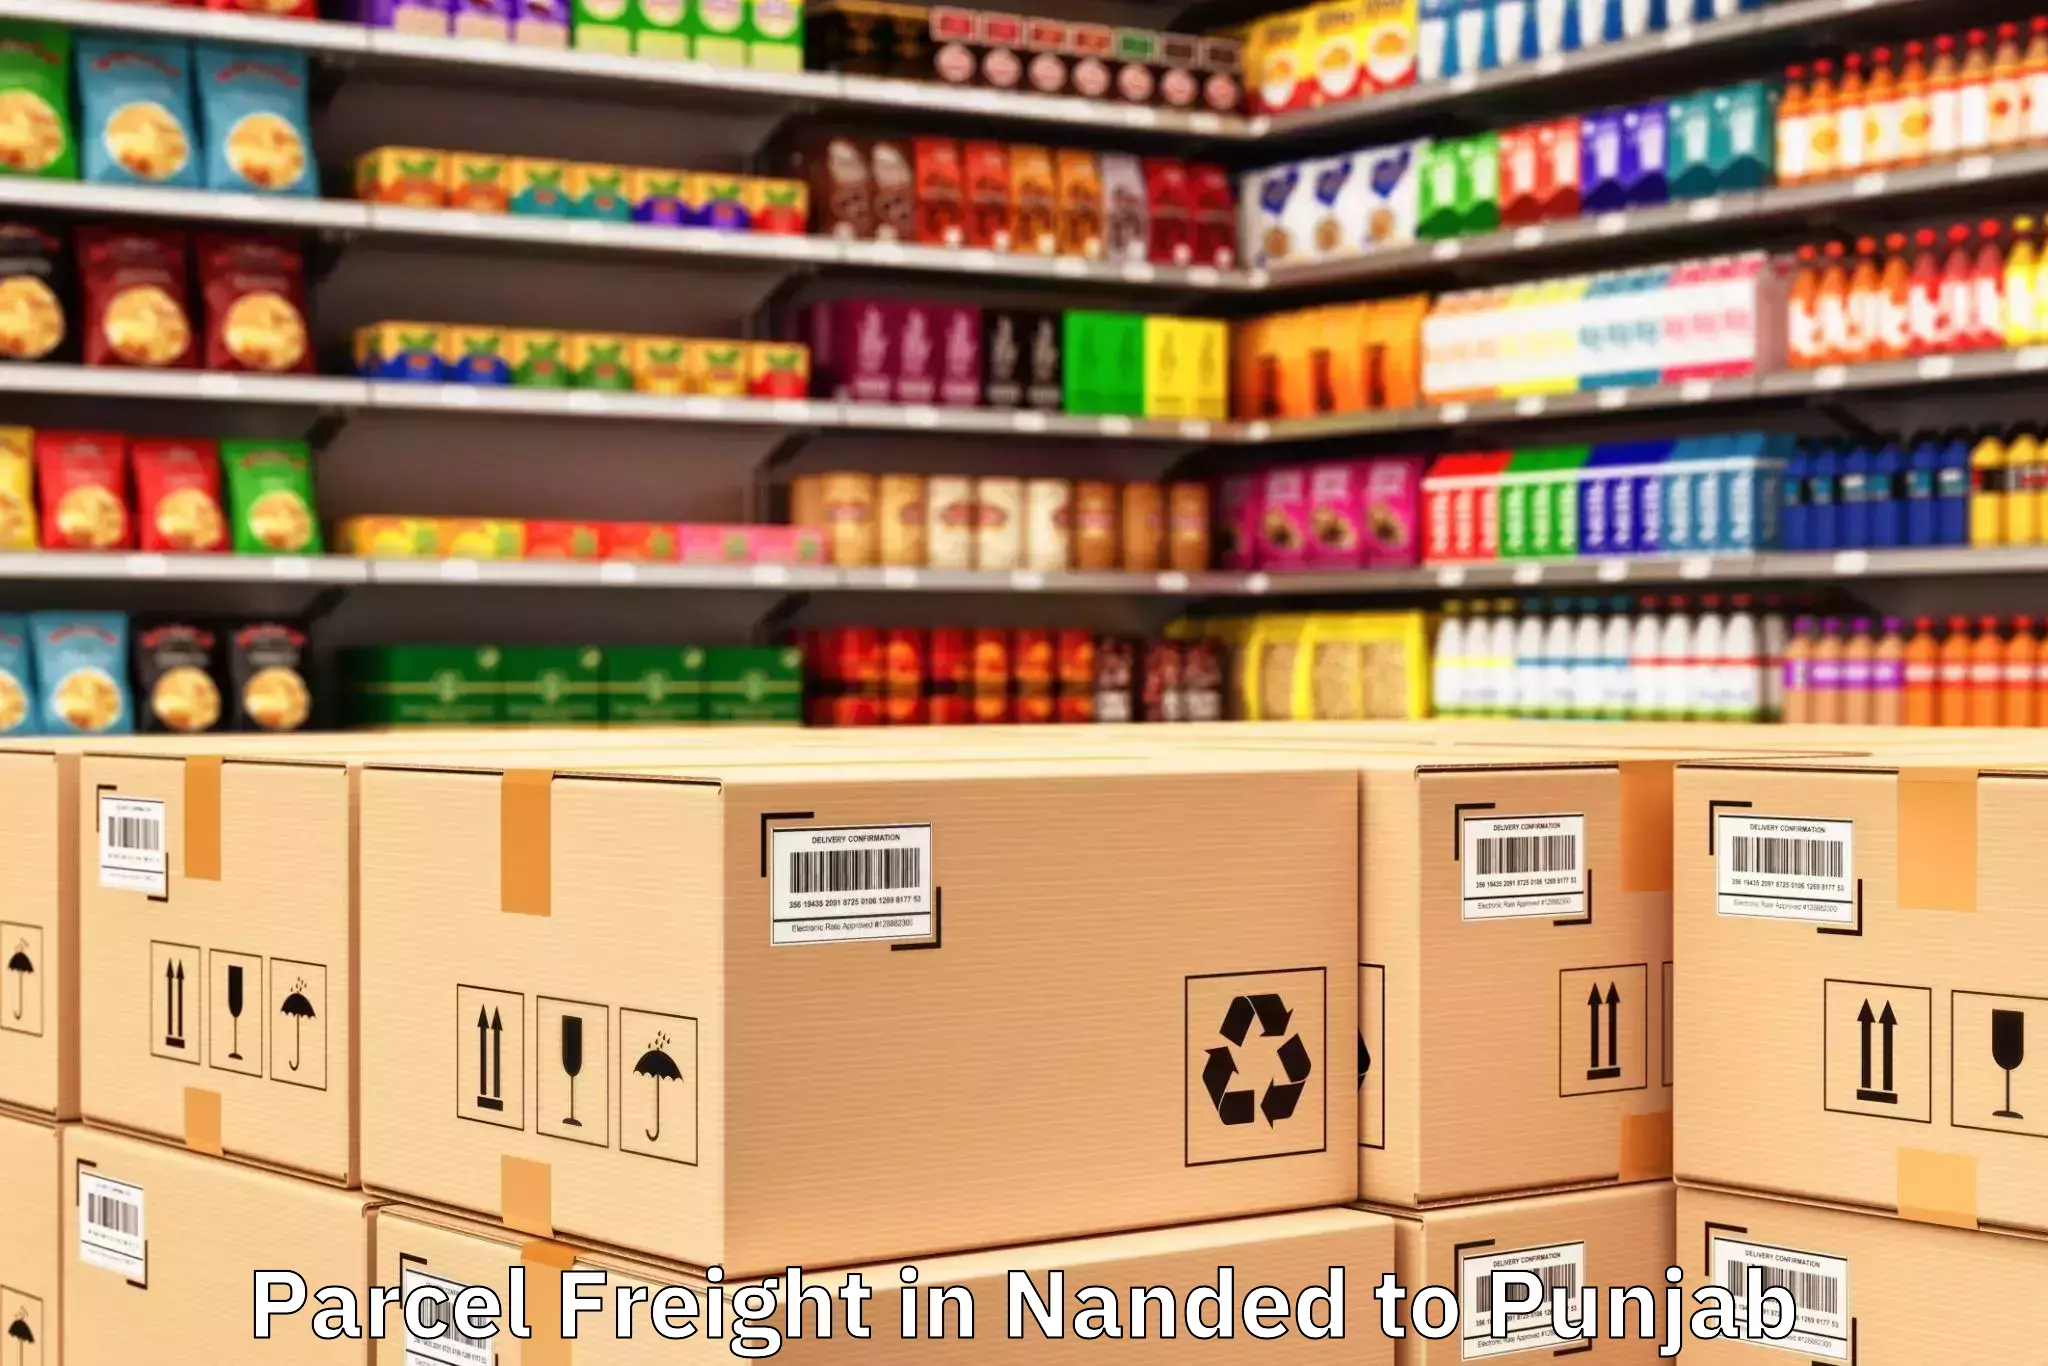 Get Nanded to Punjab Parcel Freight